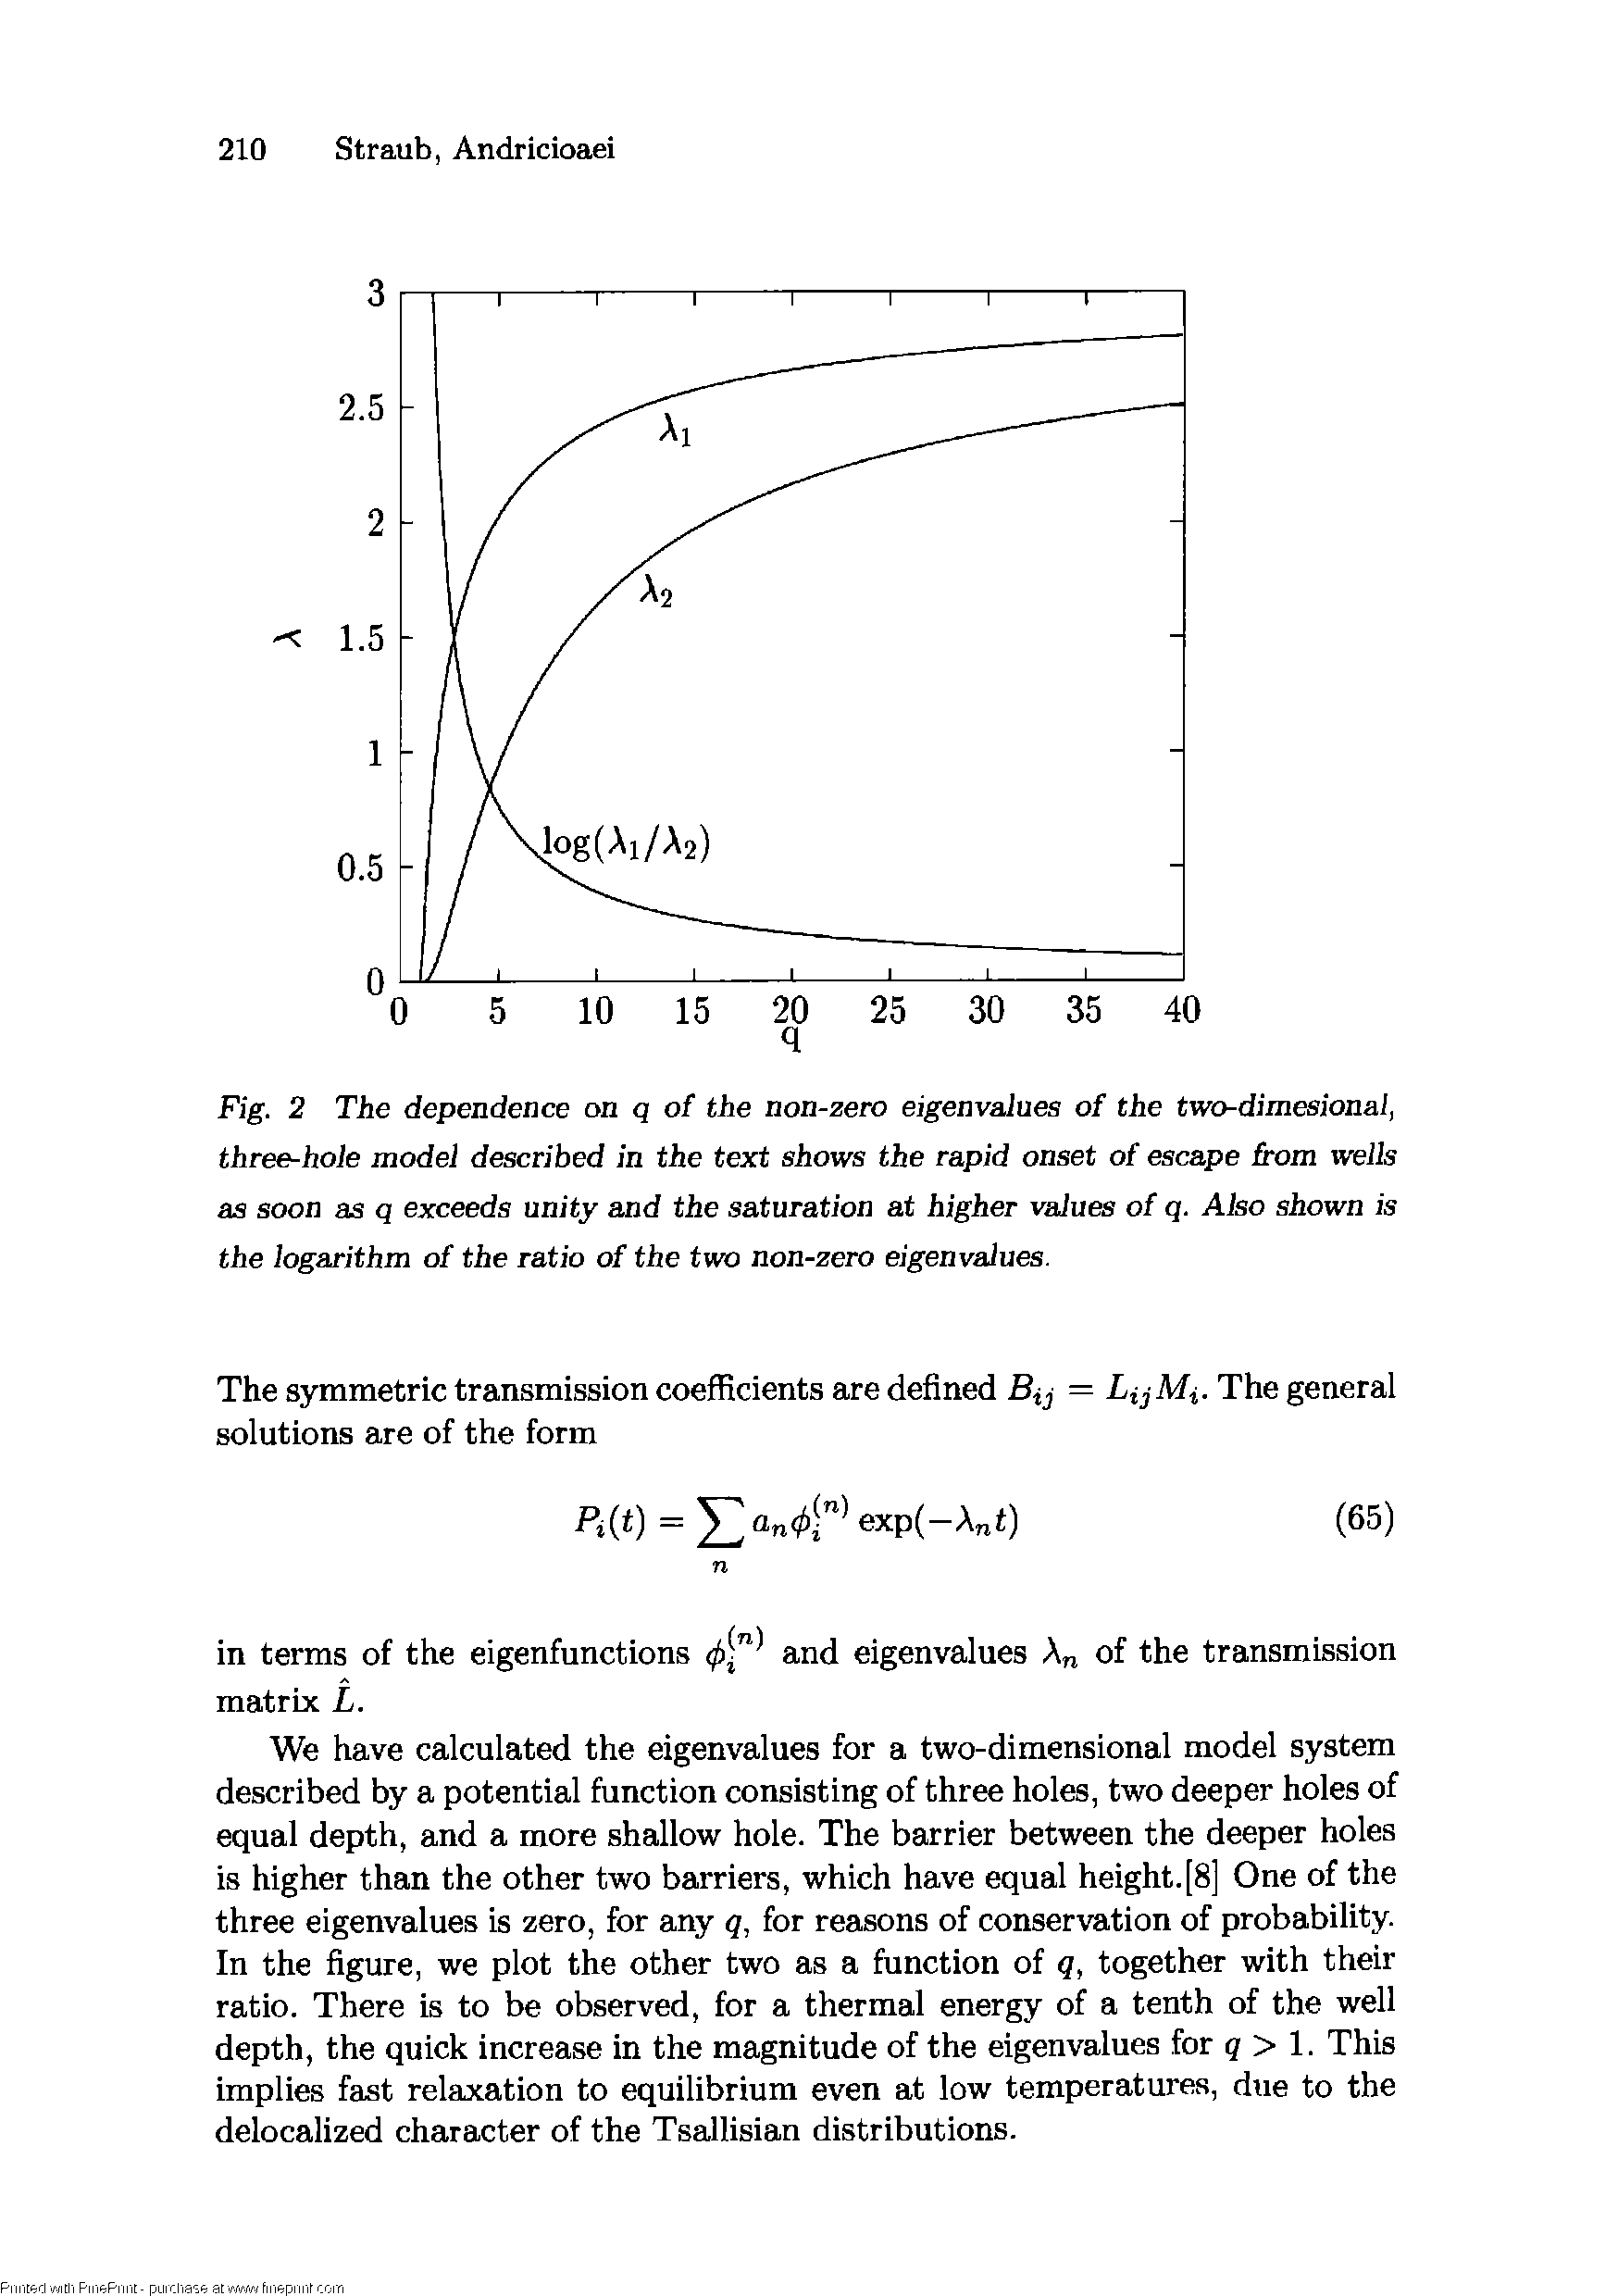 Fig. 2 The dependence on q of the non-zero eigenvalues of the two-dimesional, three-hole model described in the text shows the rapid onset of escape Grom wells as soon as q exceeds unity and the saturation at higher values of q. Also shown is the logarithm of the ratio of the two non-zero eigenvalues.